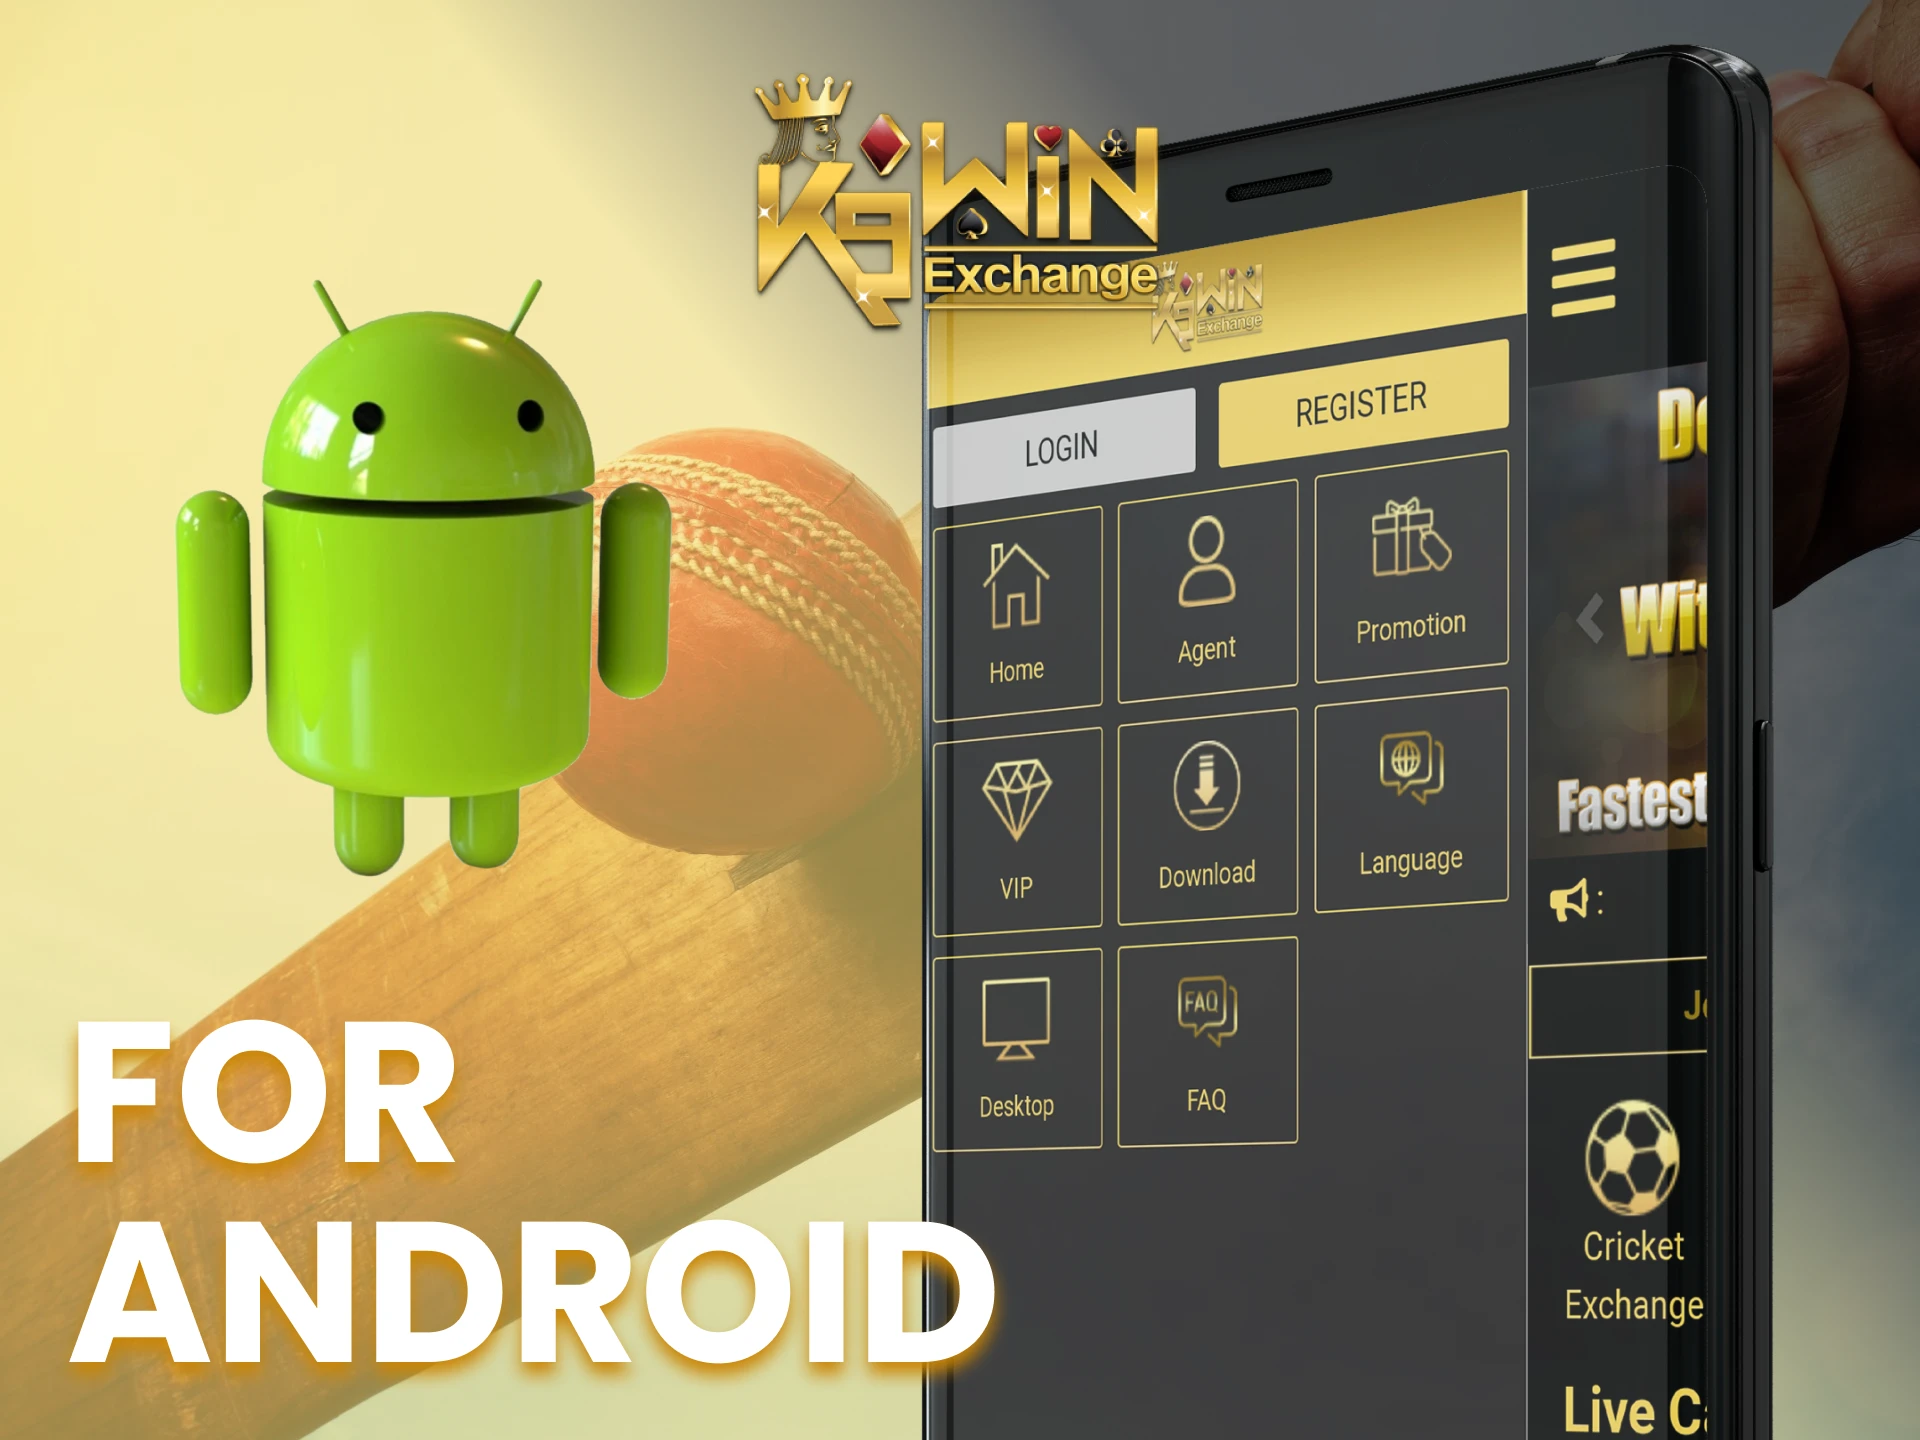 Download the K9Win Android app from a special page.